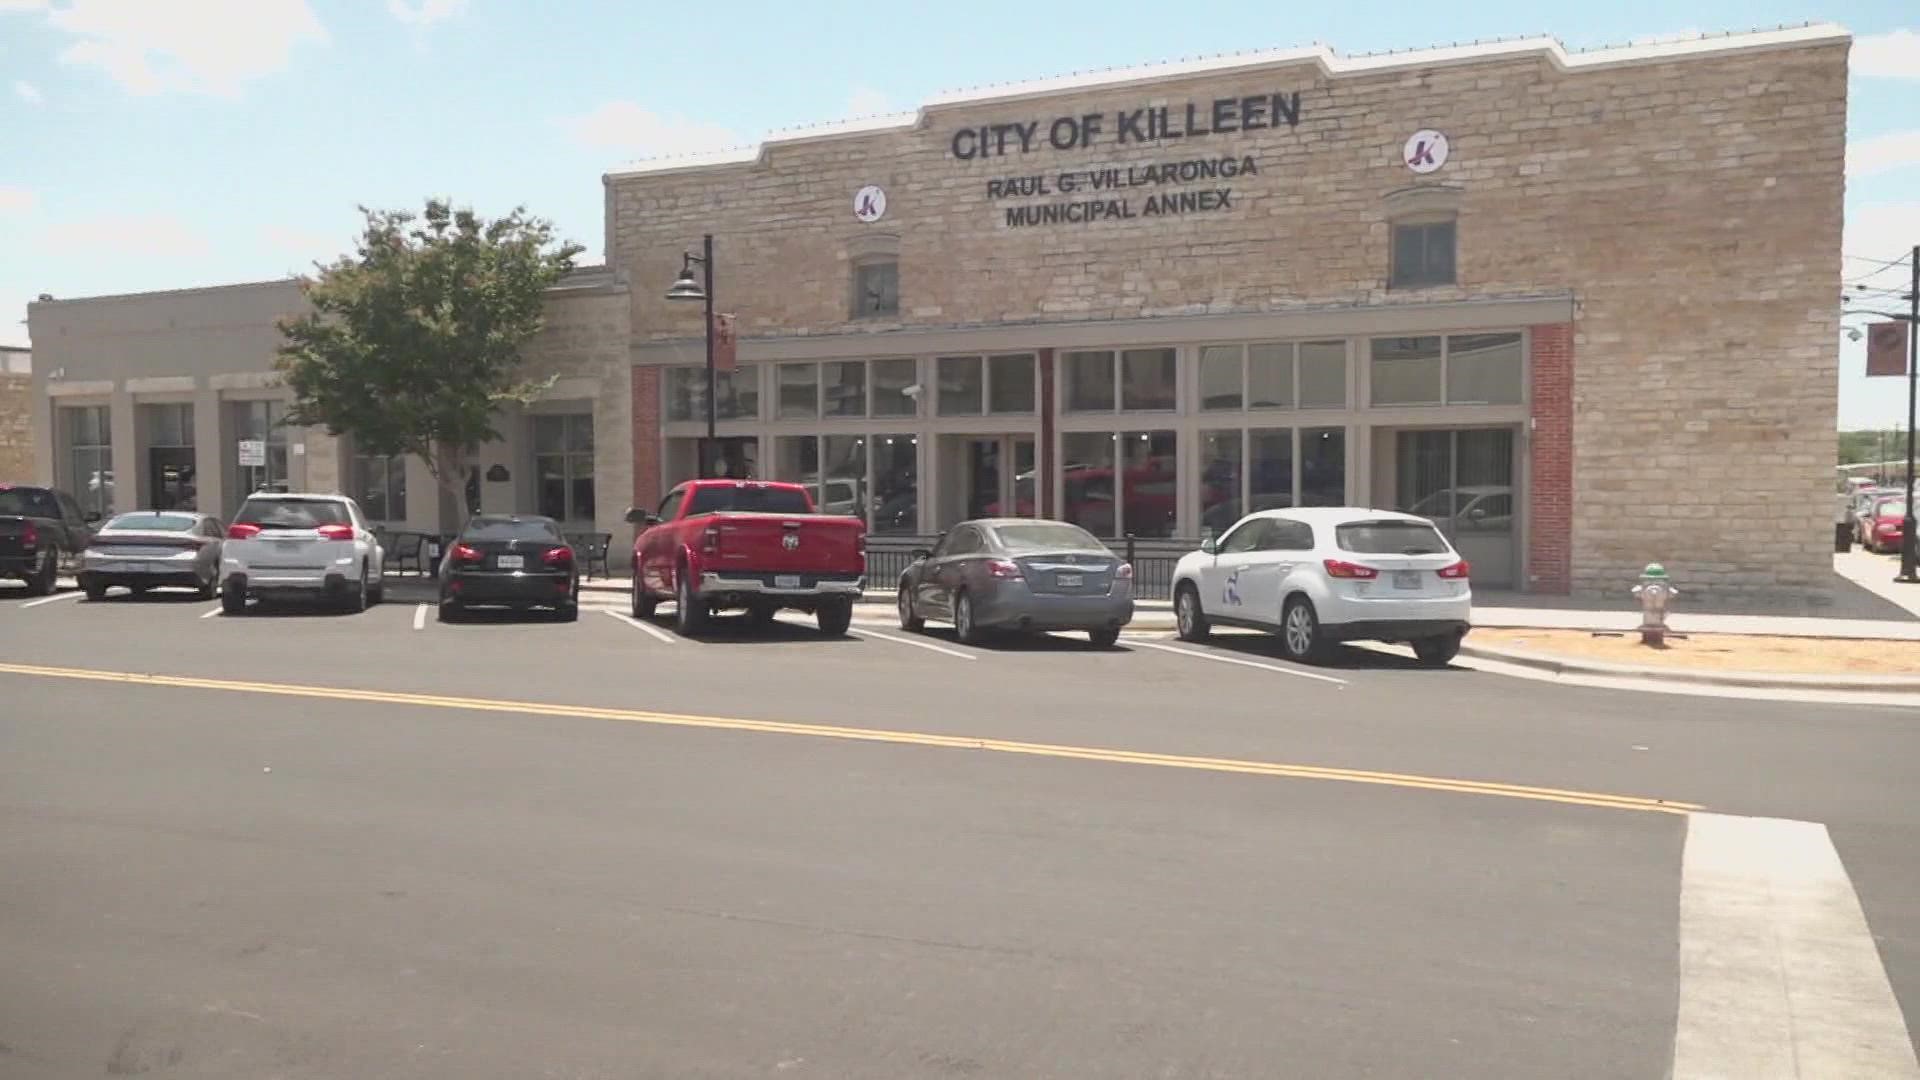 Starting next year, Killeen officers will begin a "warrant roundup" for any outstanding arrest warrants, the court warned.